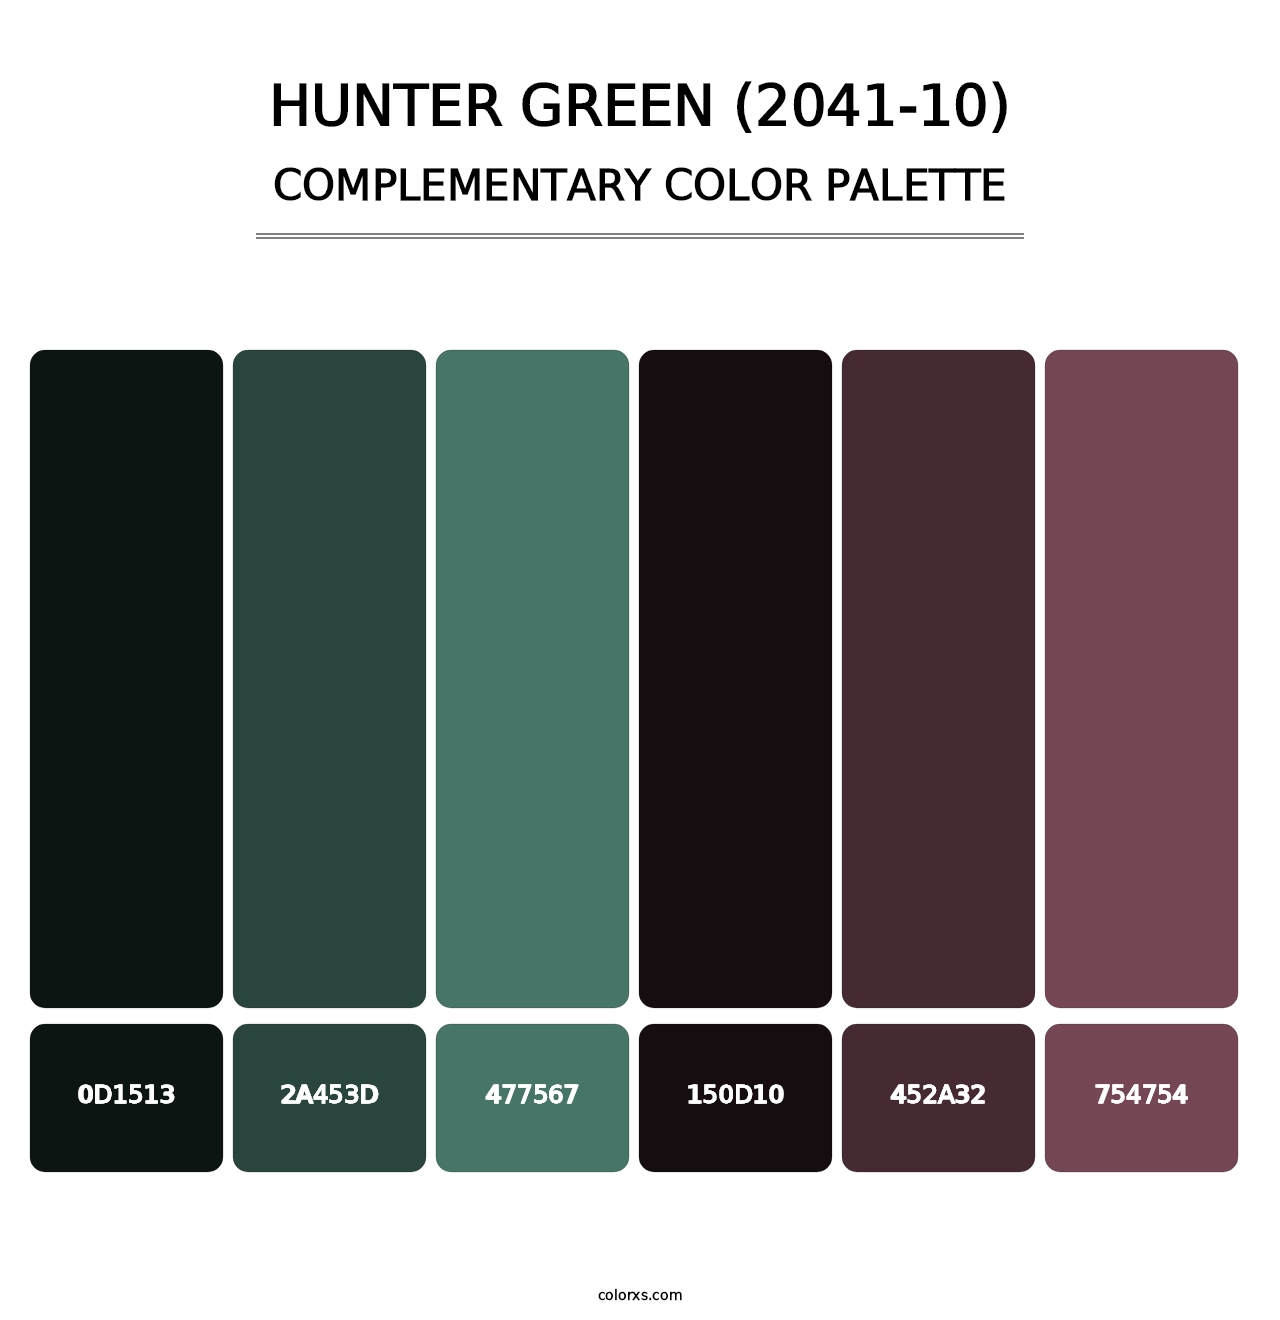 Hunter Green (2041-10) - Complementary Color Palette